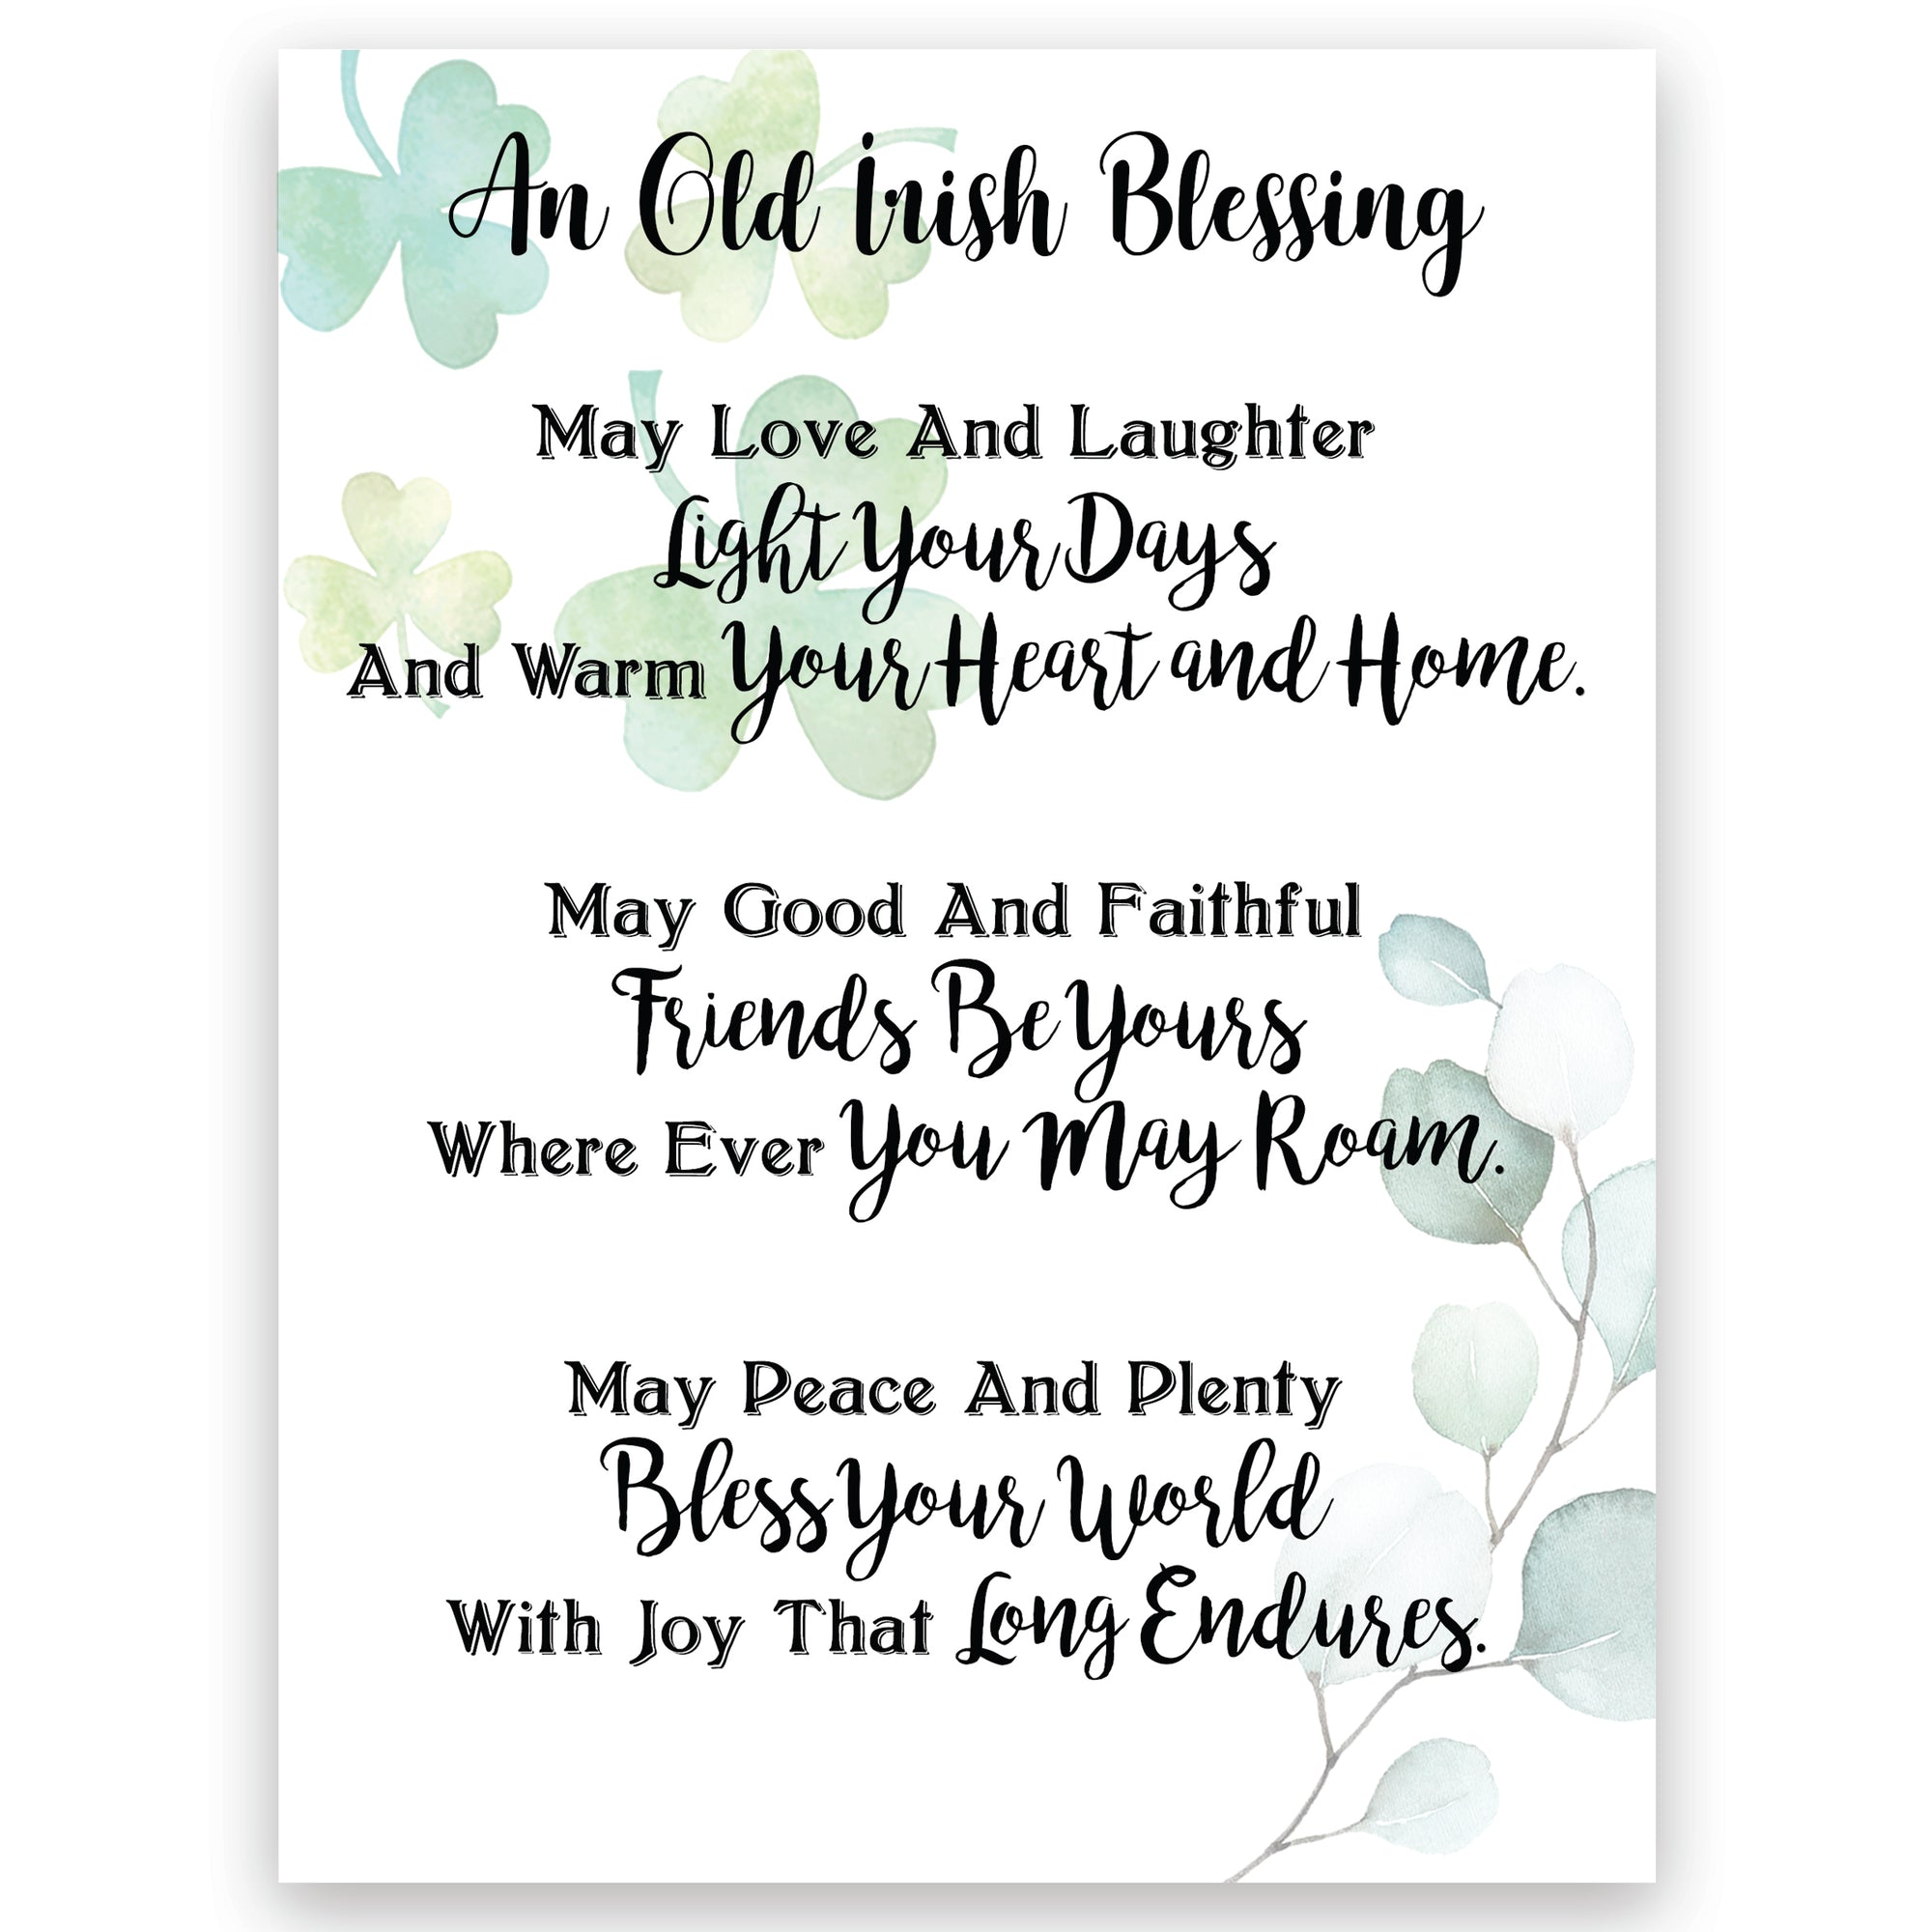 St. Patrick’s Day Irish Everyday Wooden Wall Plaque 6x8 - An Old Irish Blessing